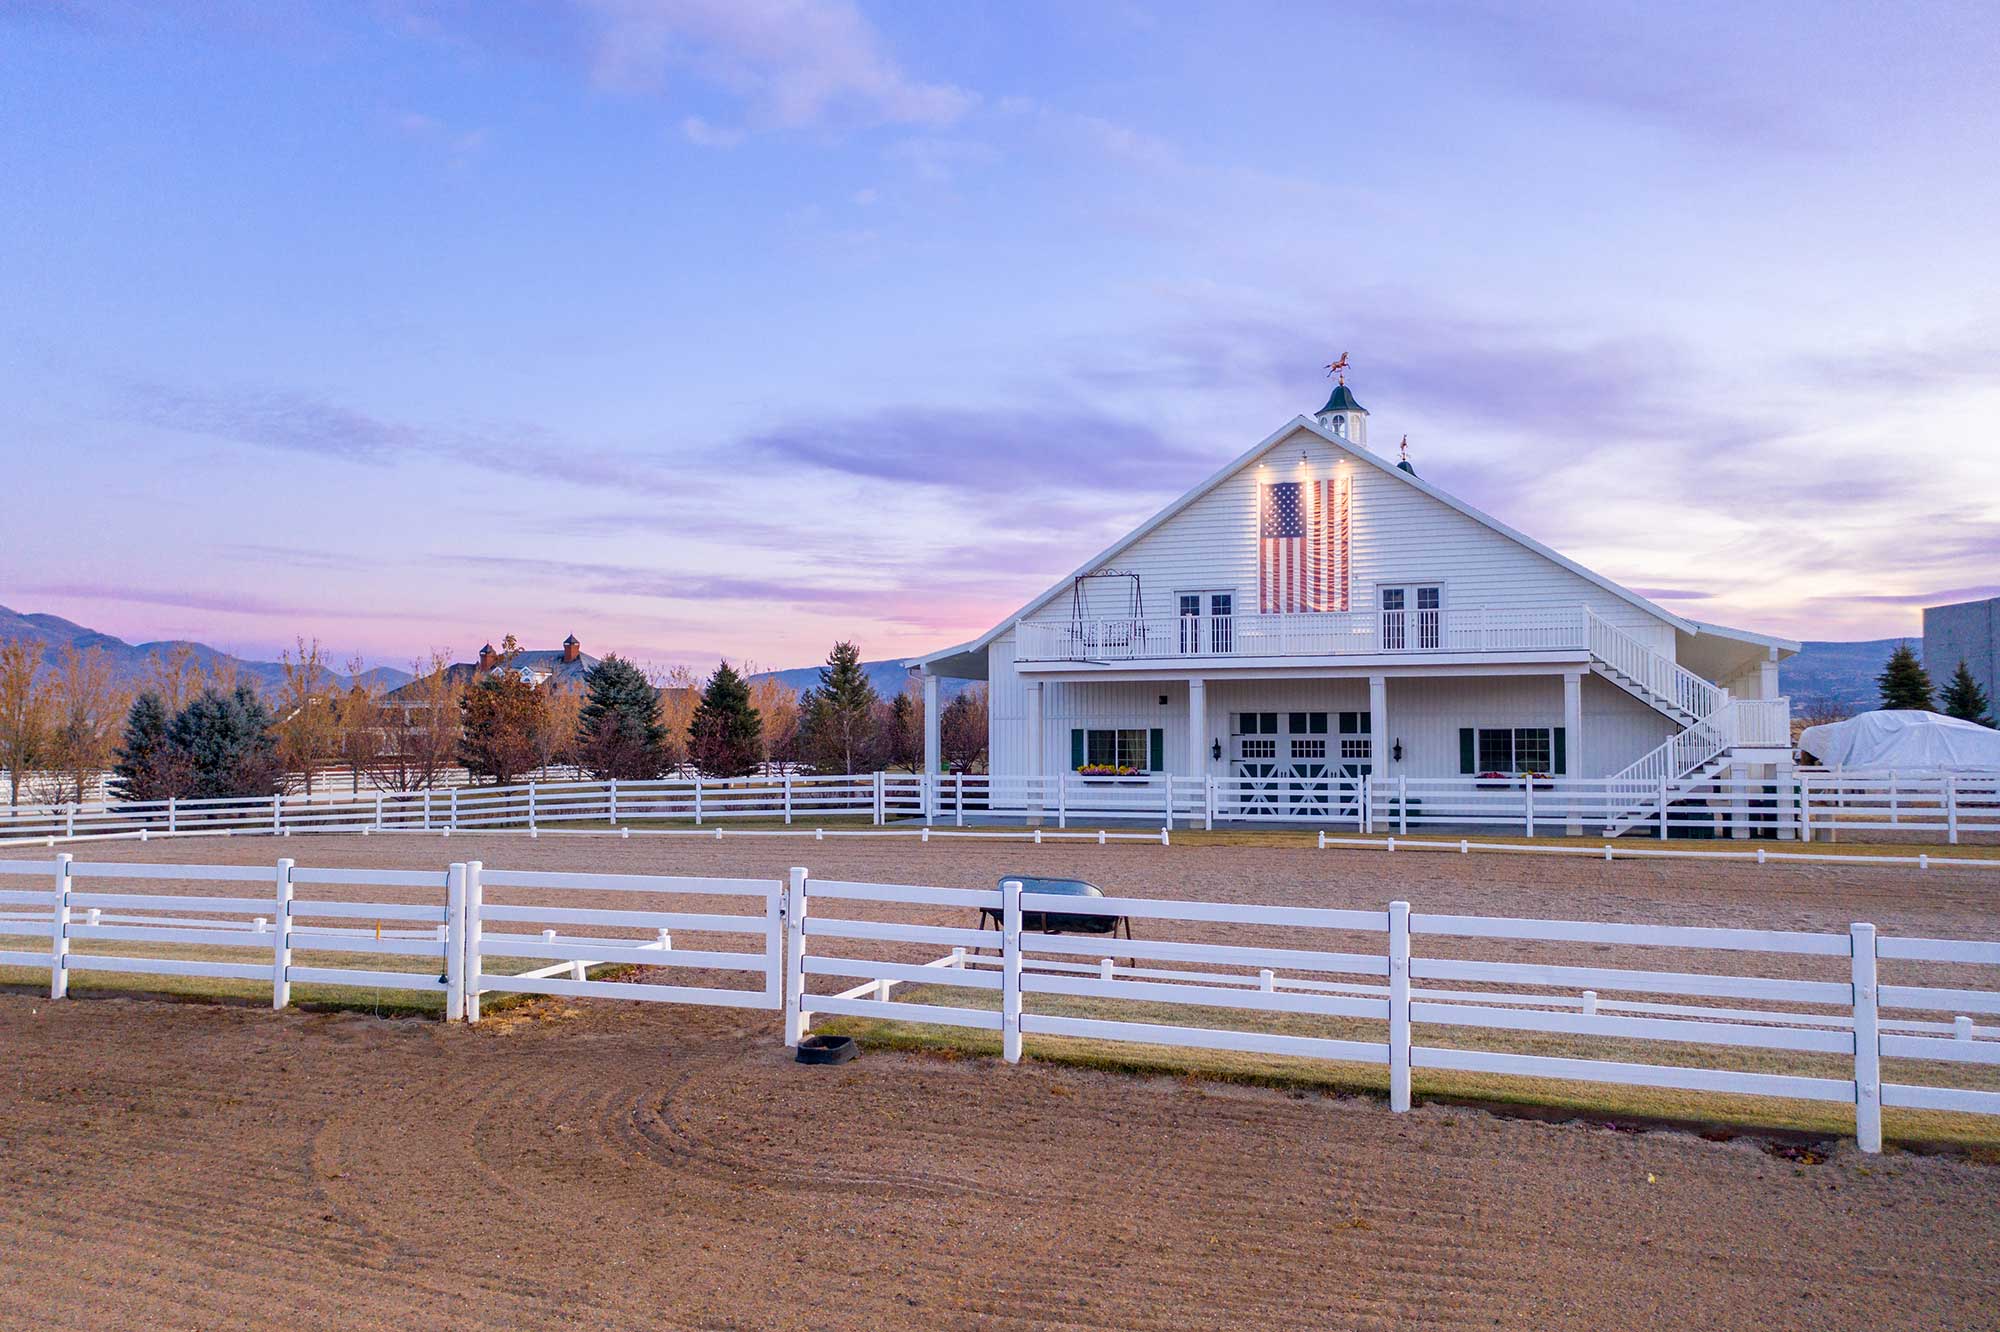 7 Reasons Buckley Fence is The World’s Finest Horse Fence